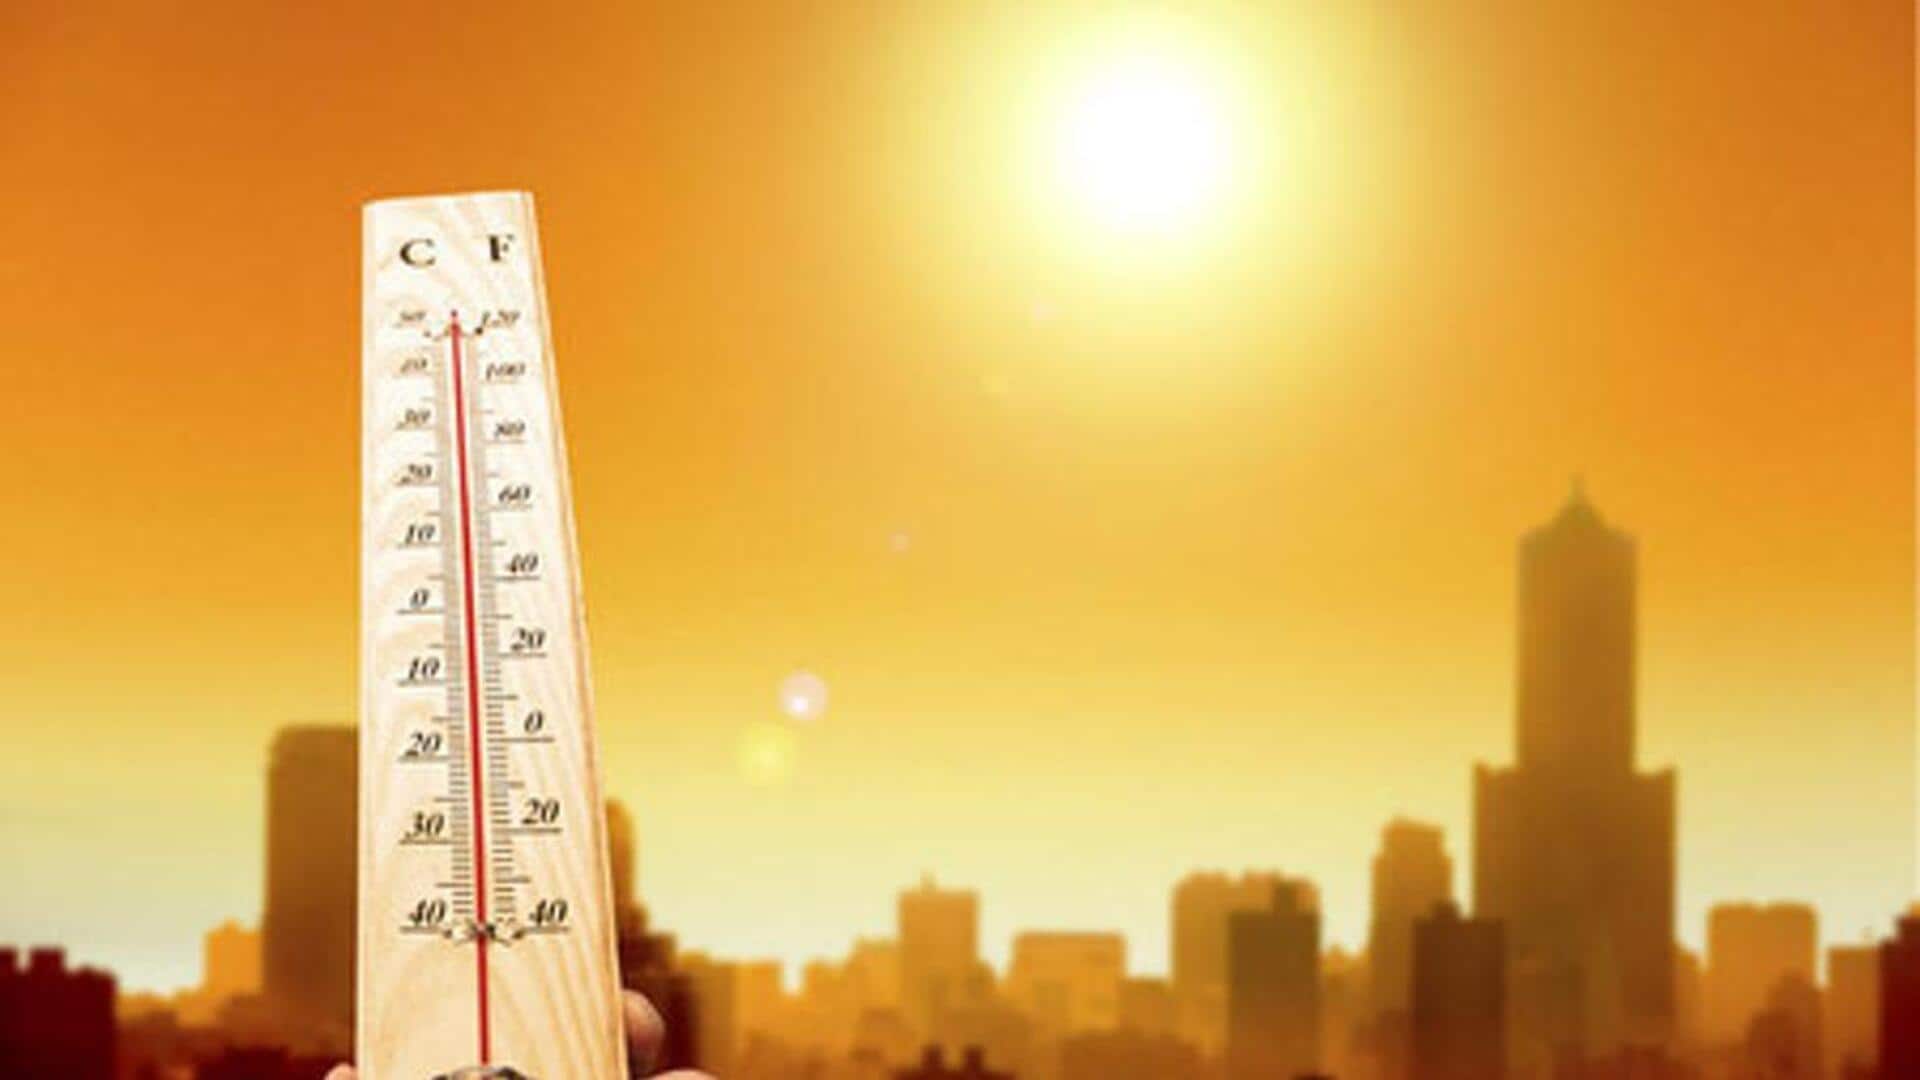 2023 was hottest year ever: What factors led to this?